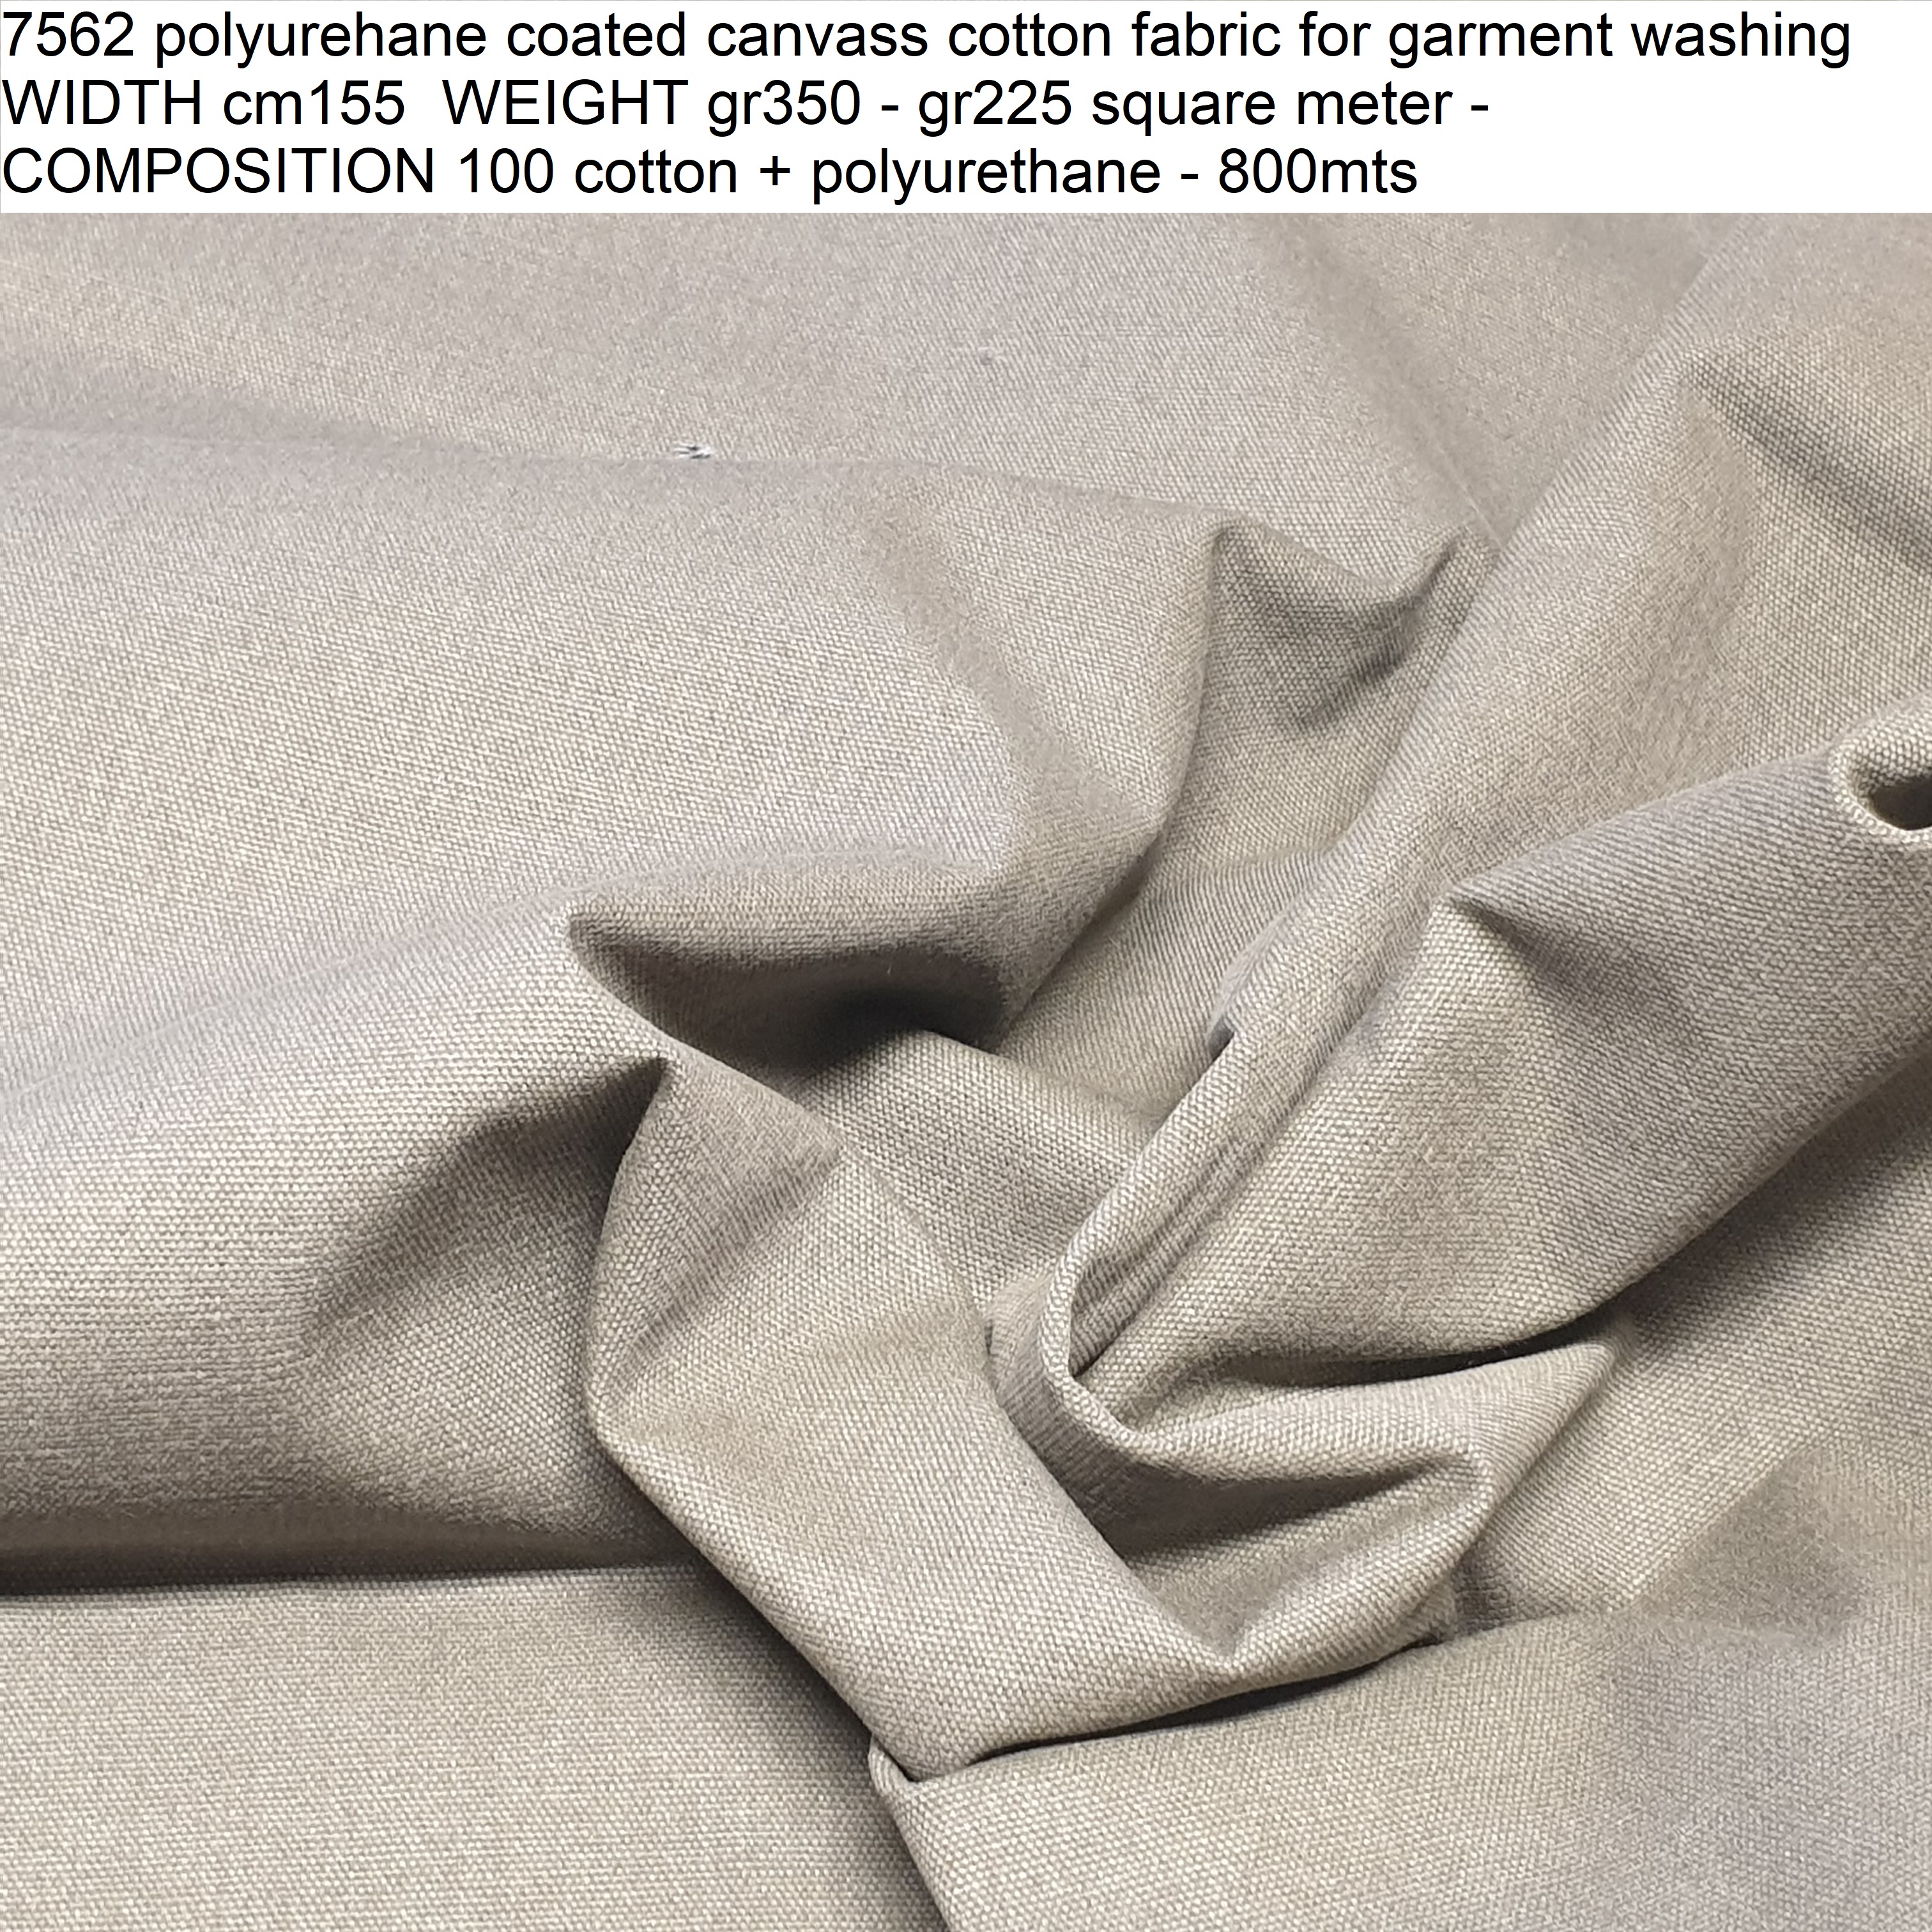 7562 polyurehane coated canvass cotton fabric for garment washing WIDTH cm155 WEIGHT gr350 - gr225 square meter - COMPOSITION 100 cotton + polyurethane - 800mts